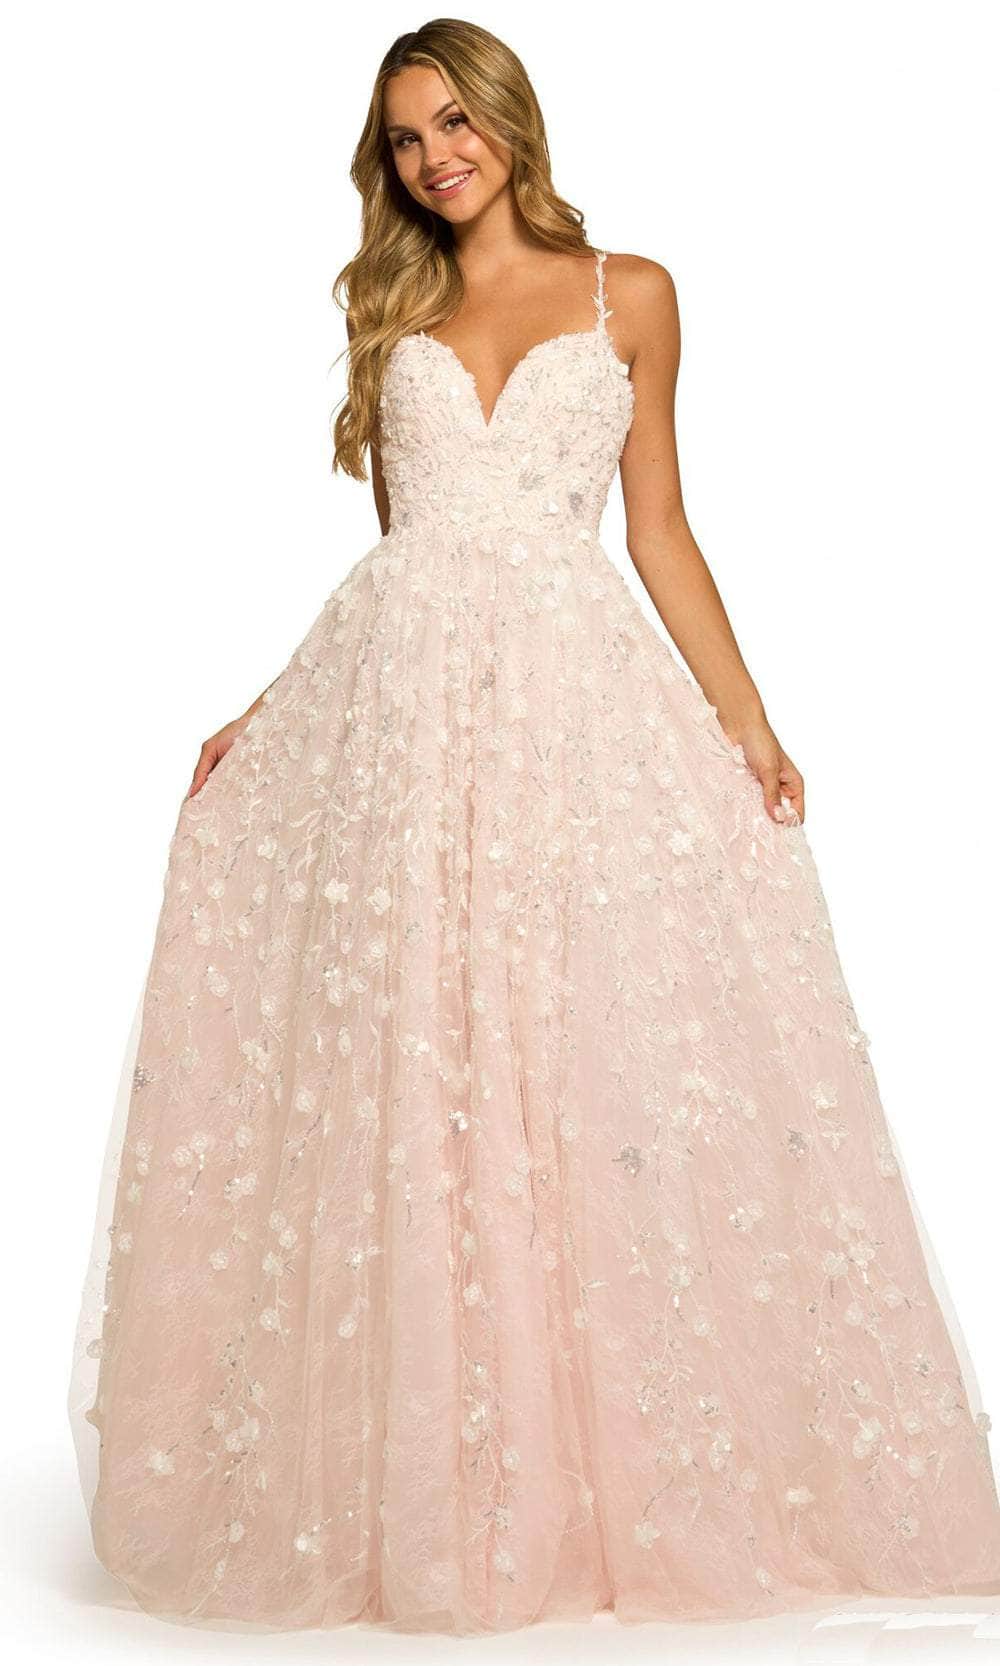 Image of Sherri Hill 55529 - Floral Applique A-line Silhouette Gown